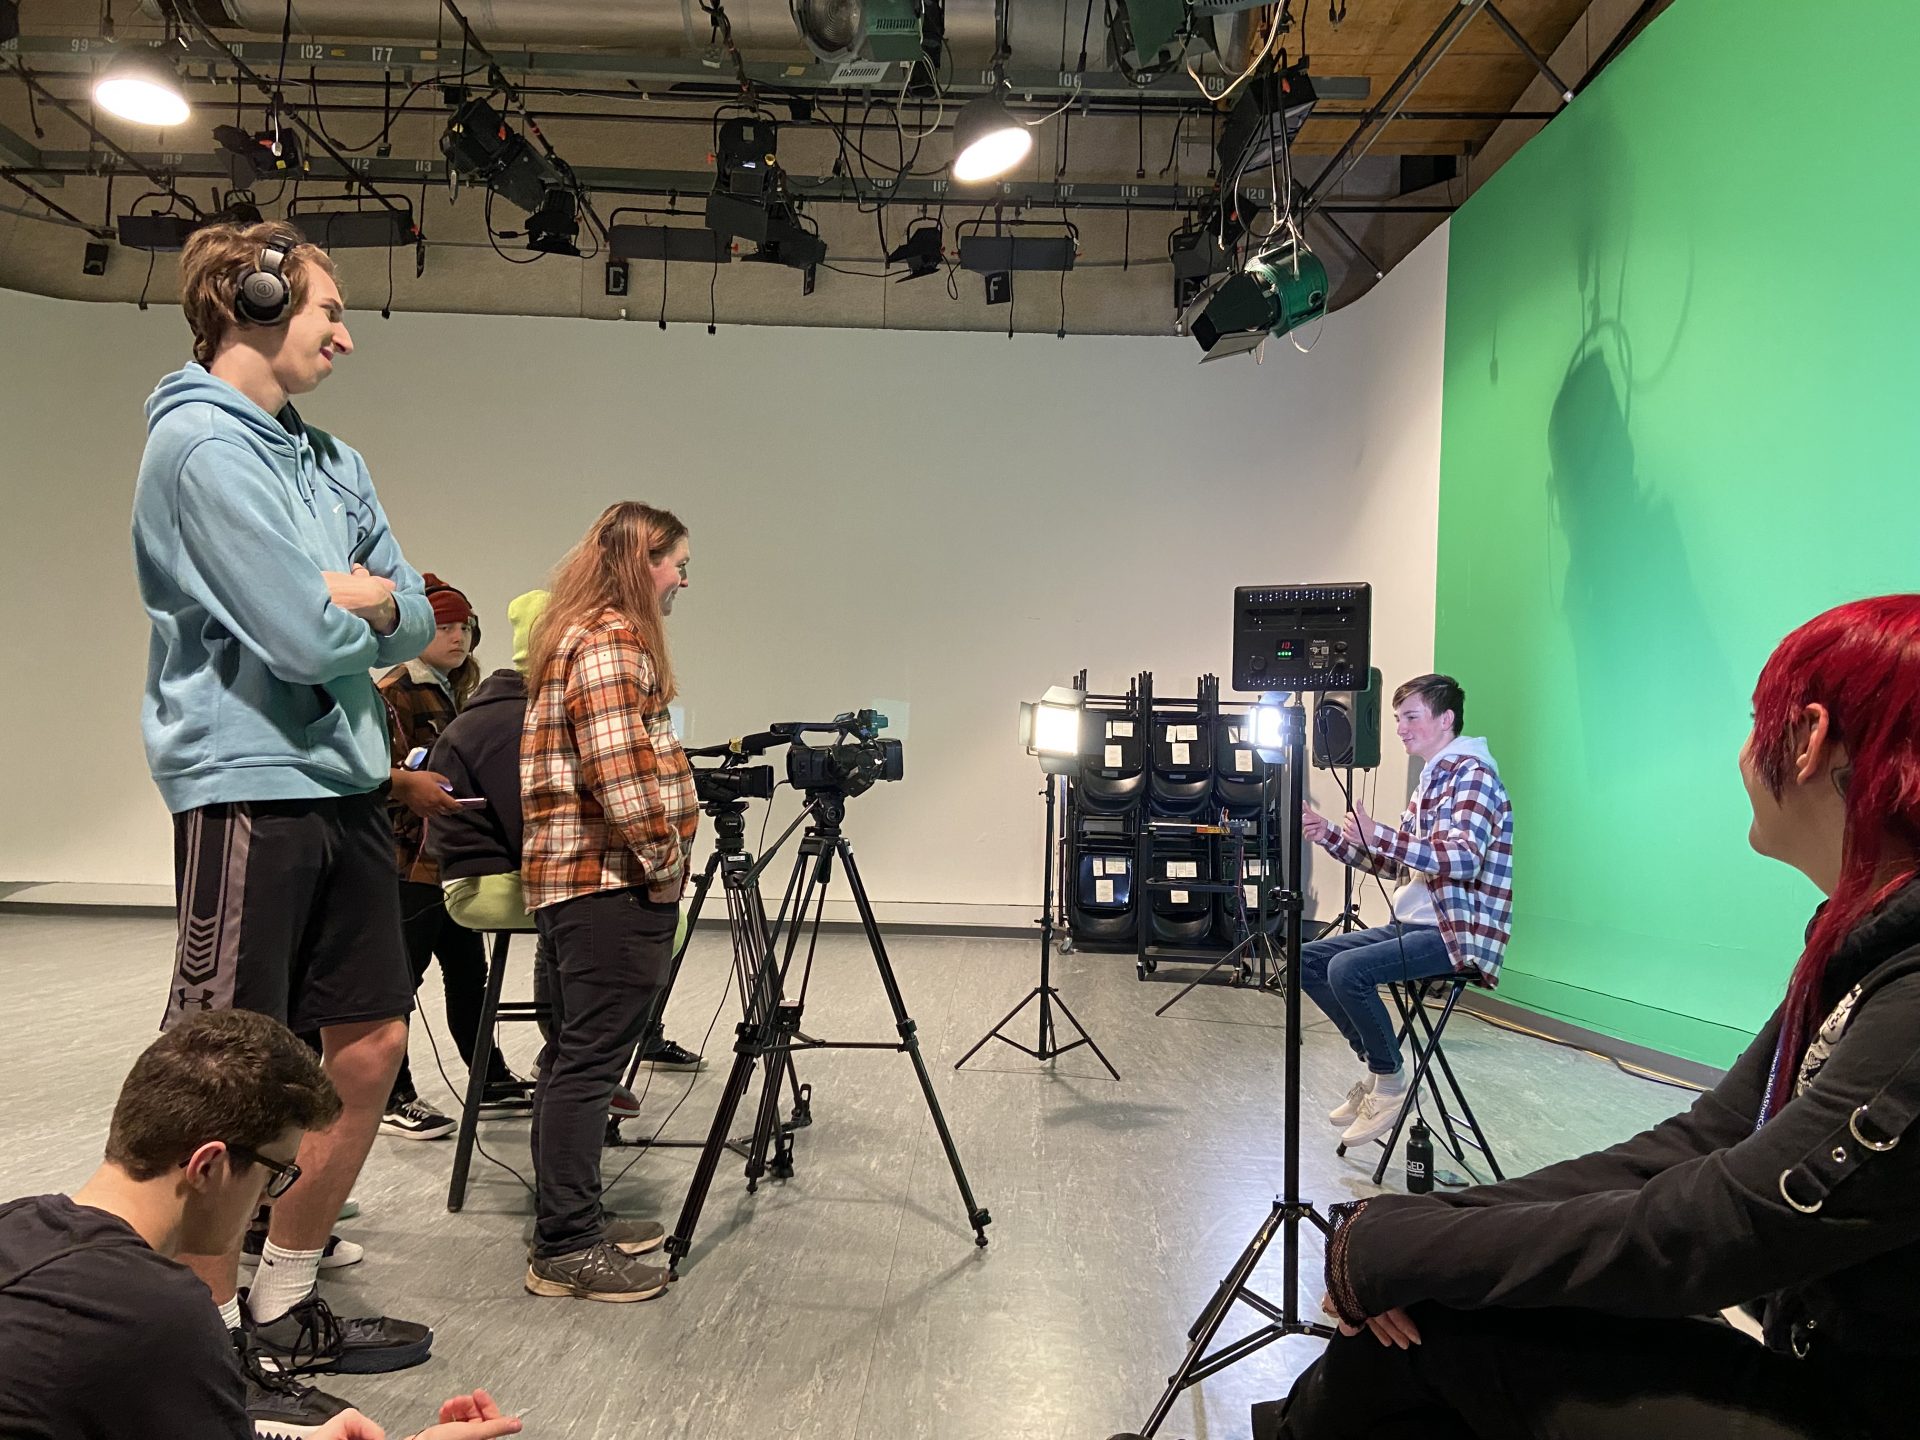 Student filming in front of a green screen